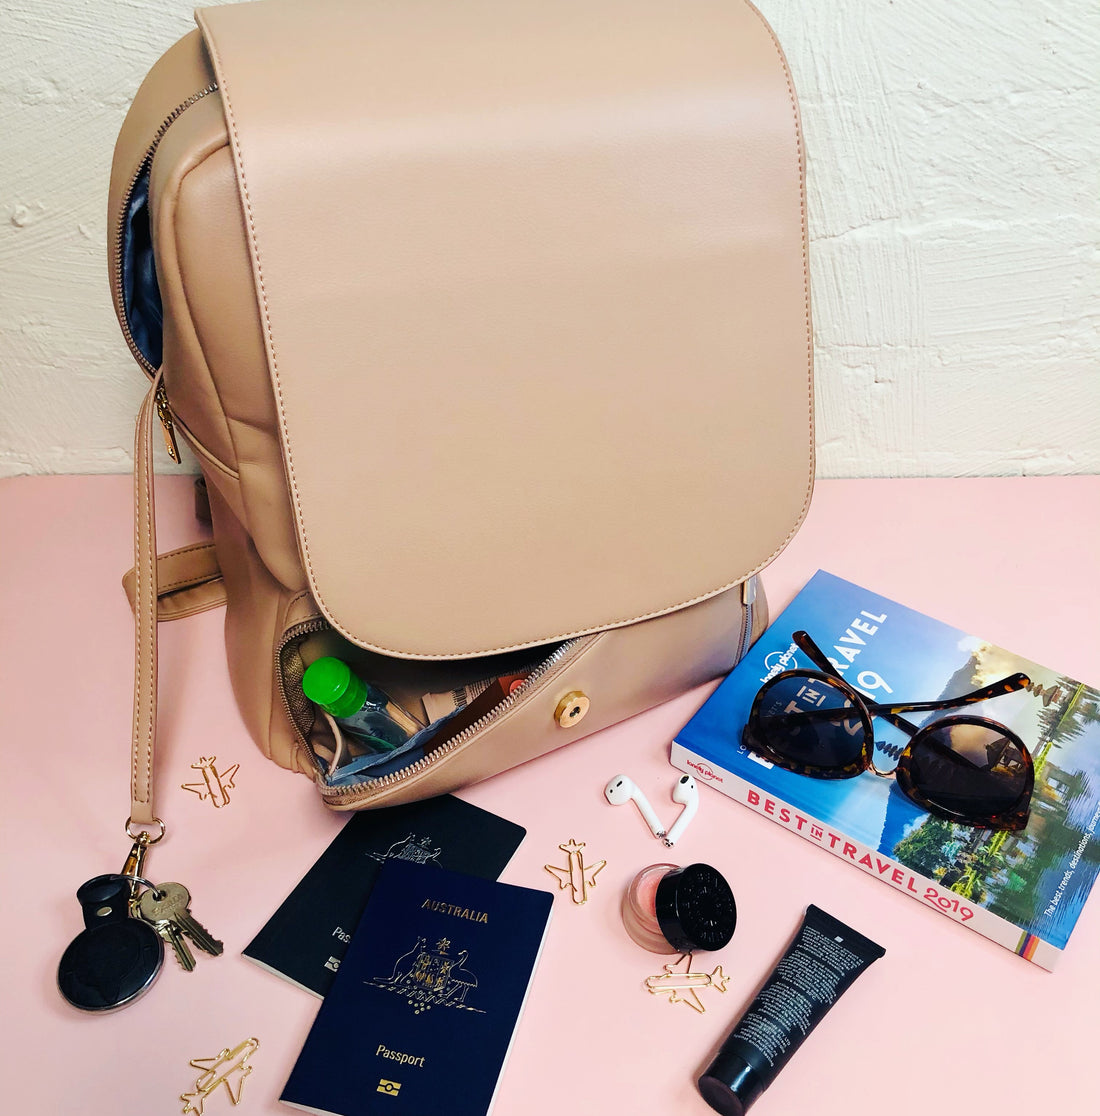 tan backpack against a pink backdrop and white brick wall. sunglasses, passports, makeup all sitting next to the backpack to show what to pack